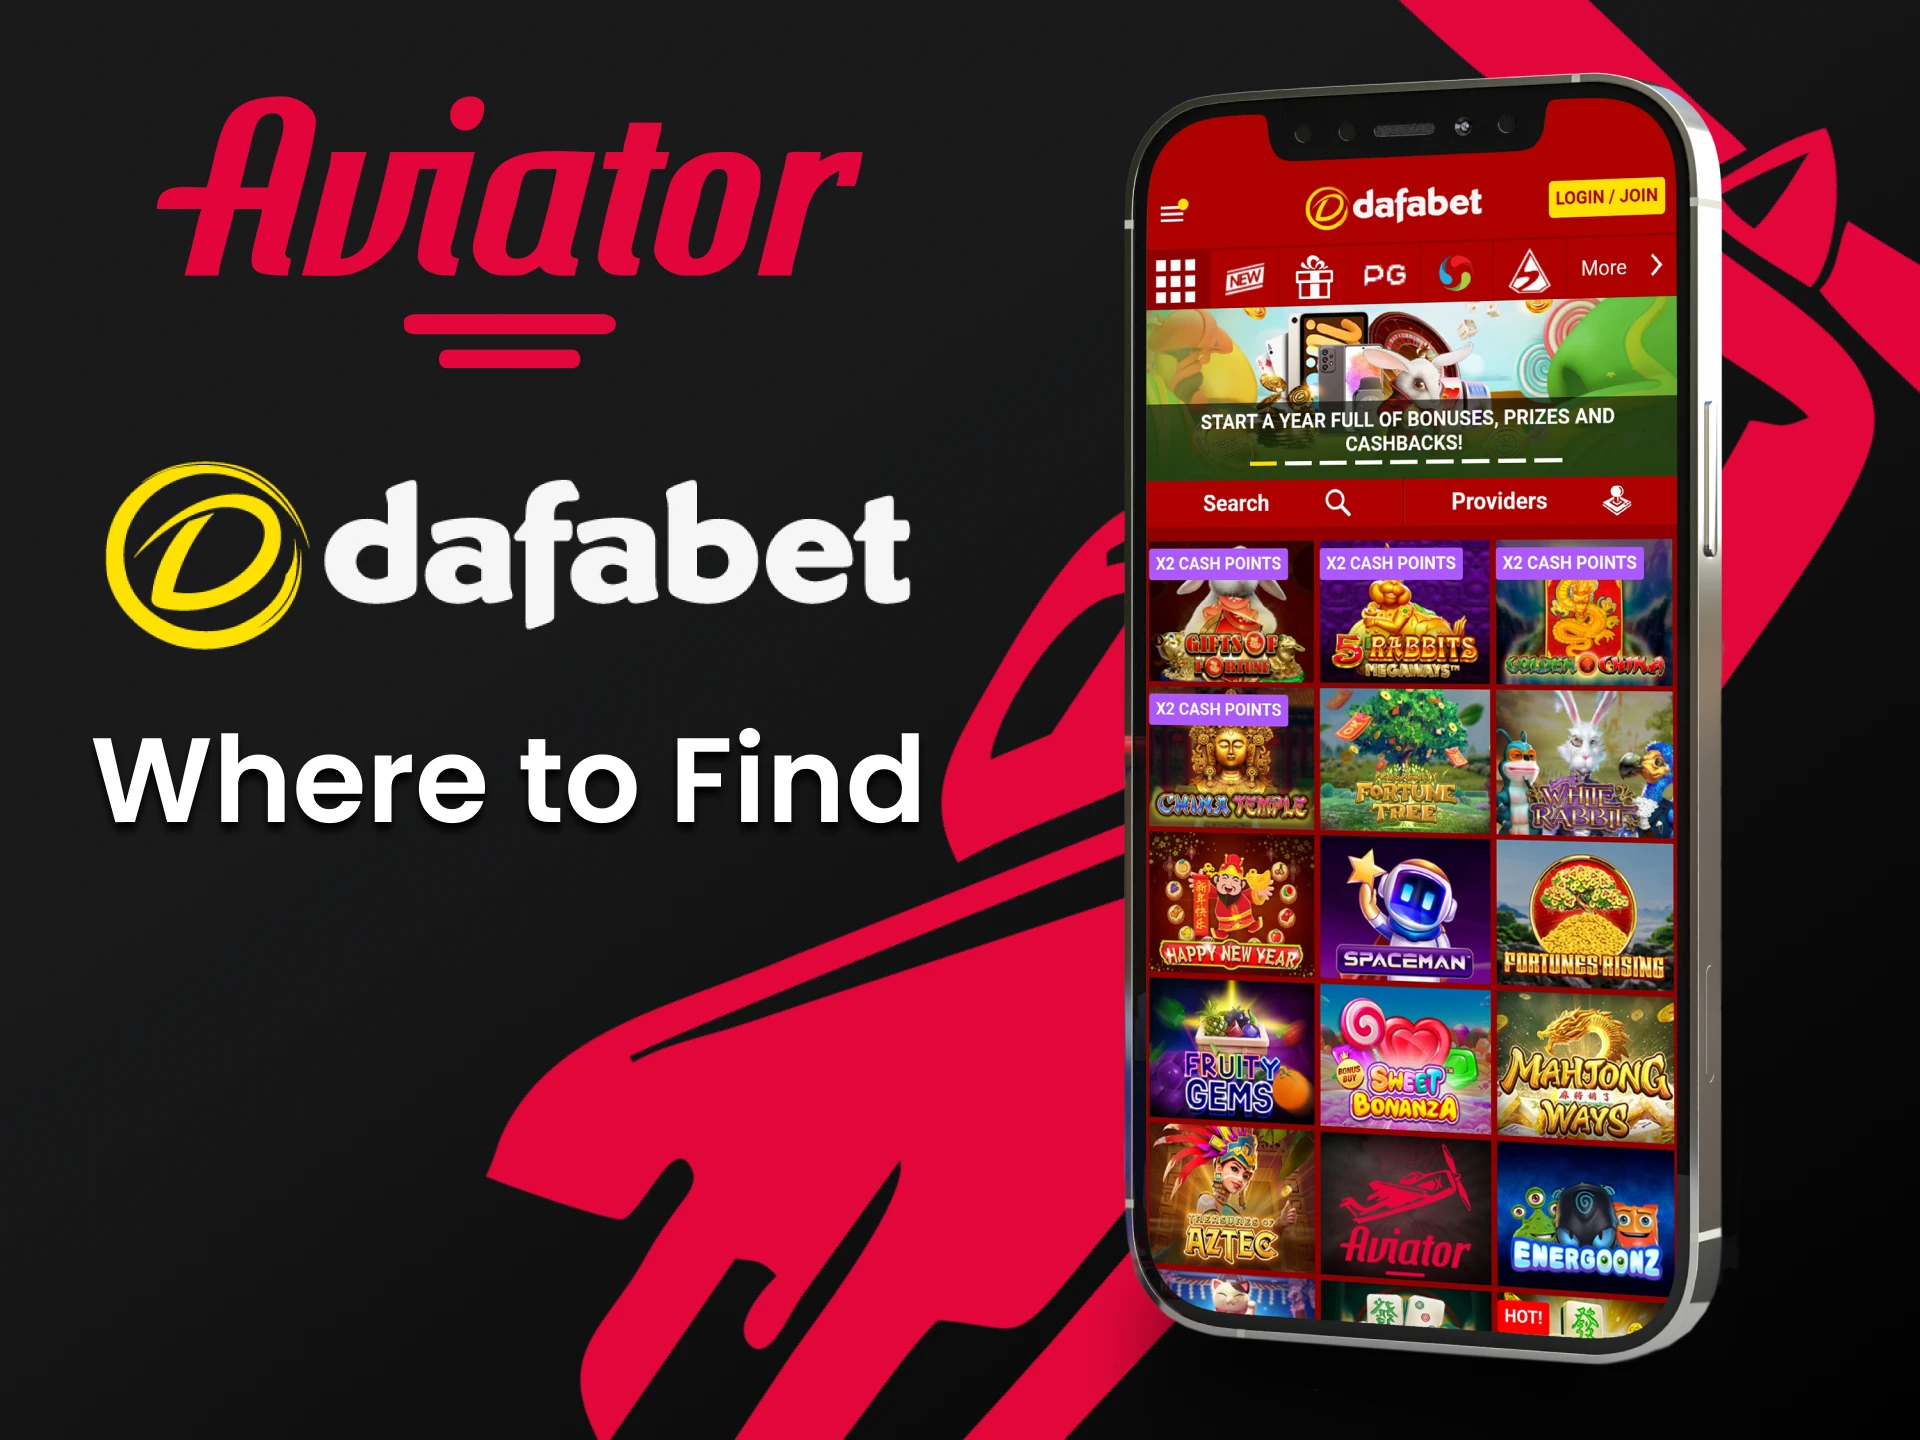 Find the right section with Dafabet games to play Aviator.